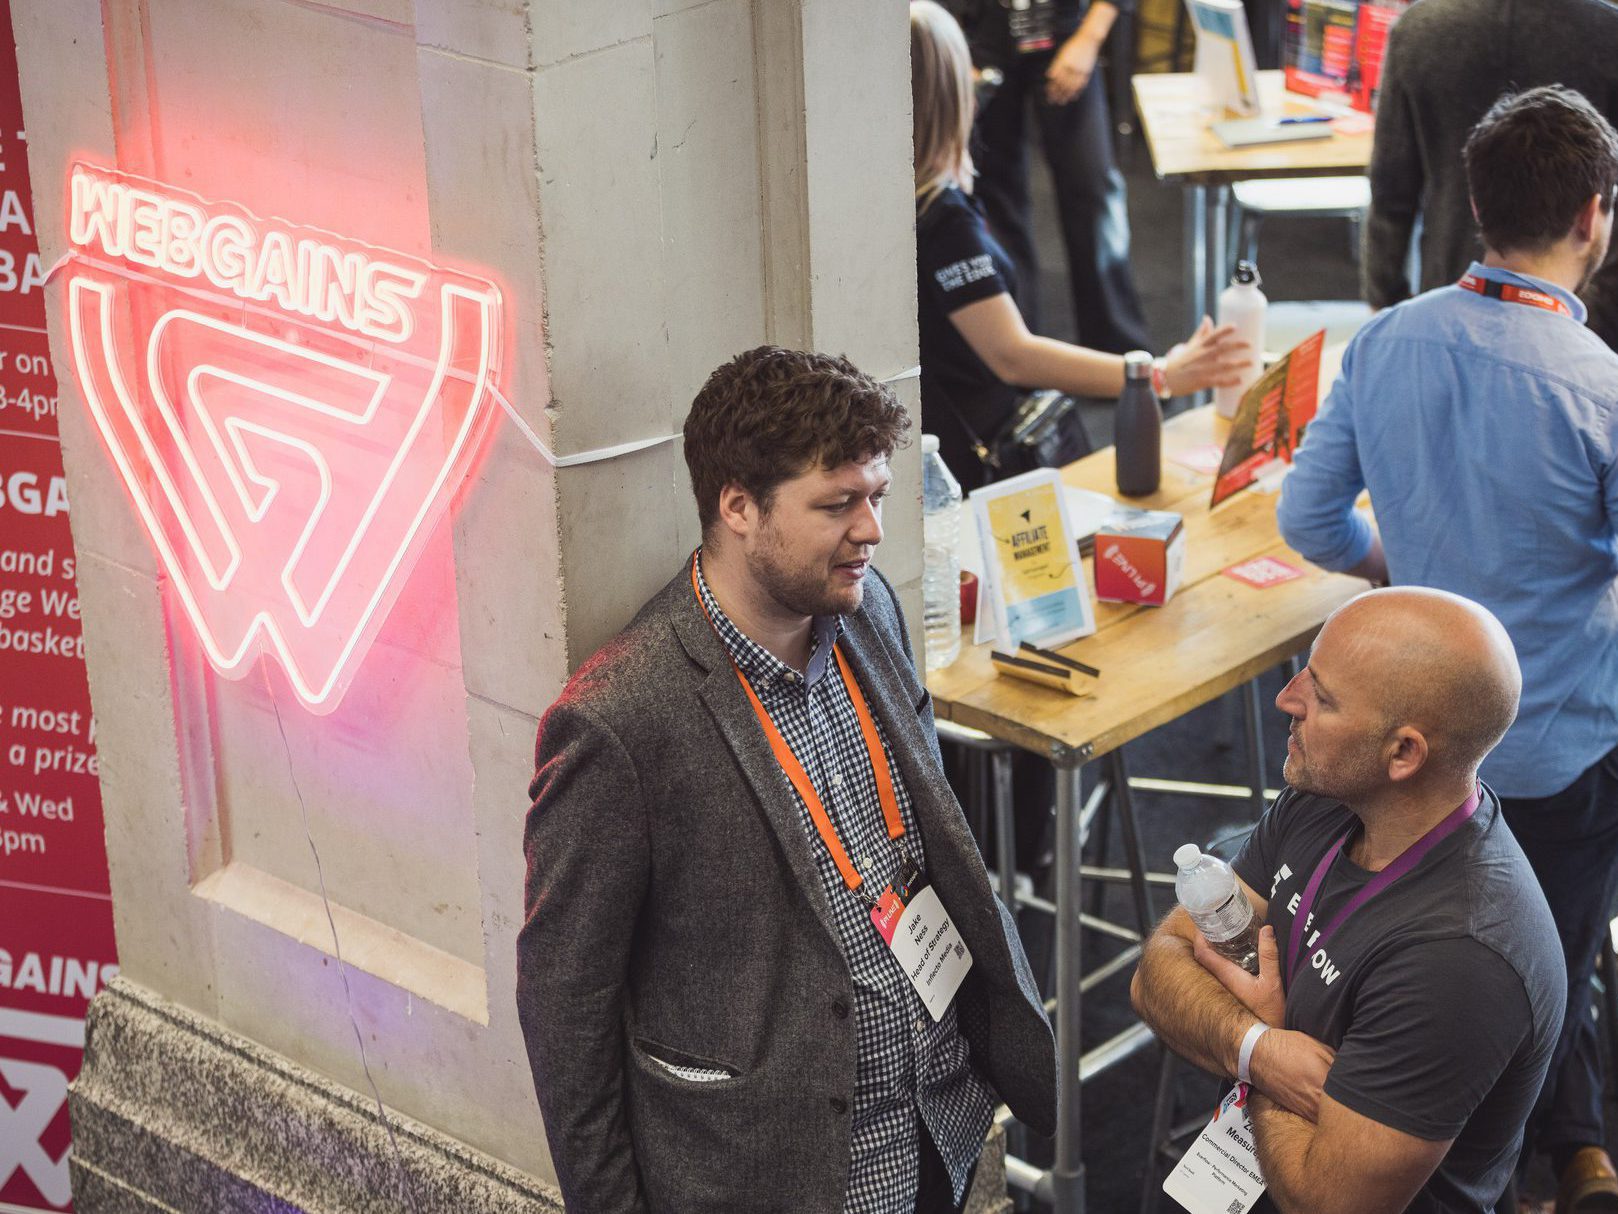 Image showing two men talking by a neon Webgains sign at a trade show.